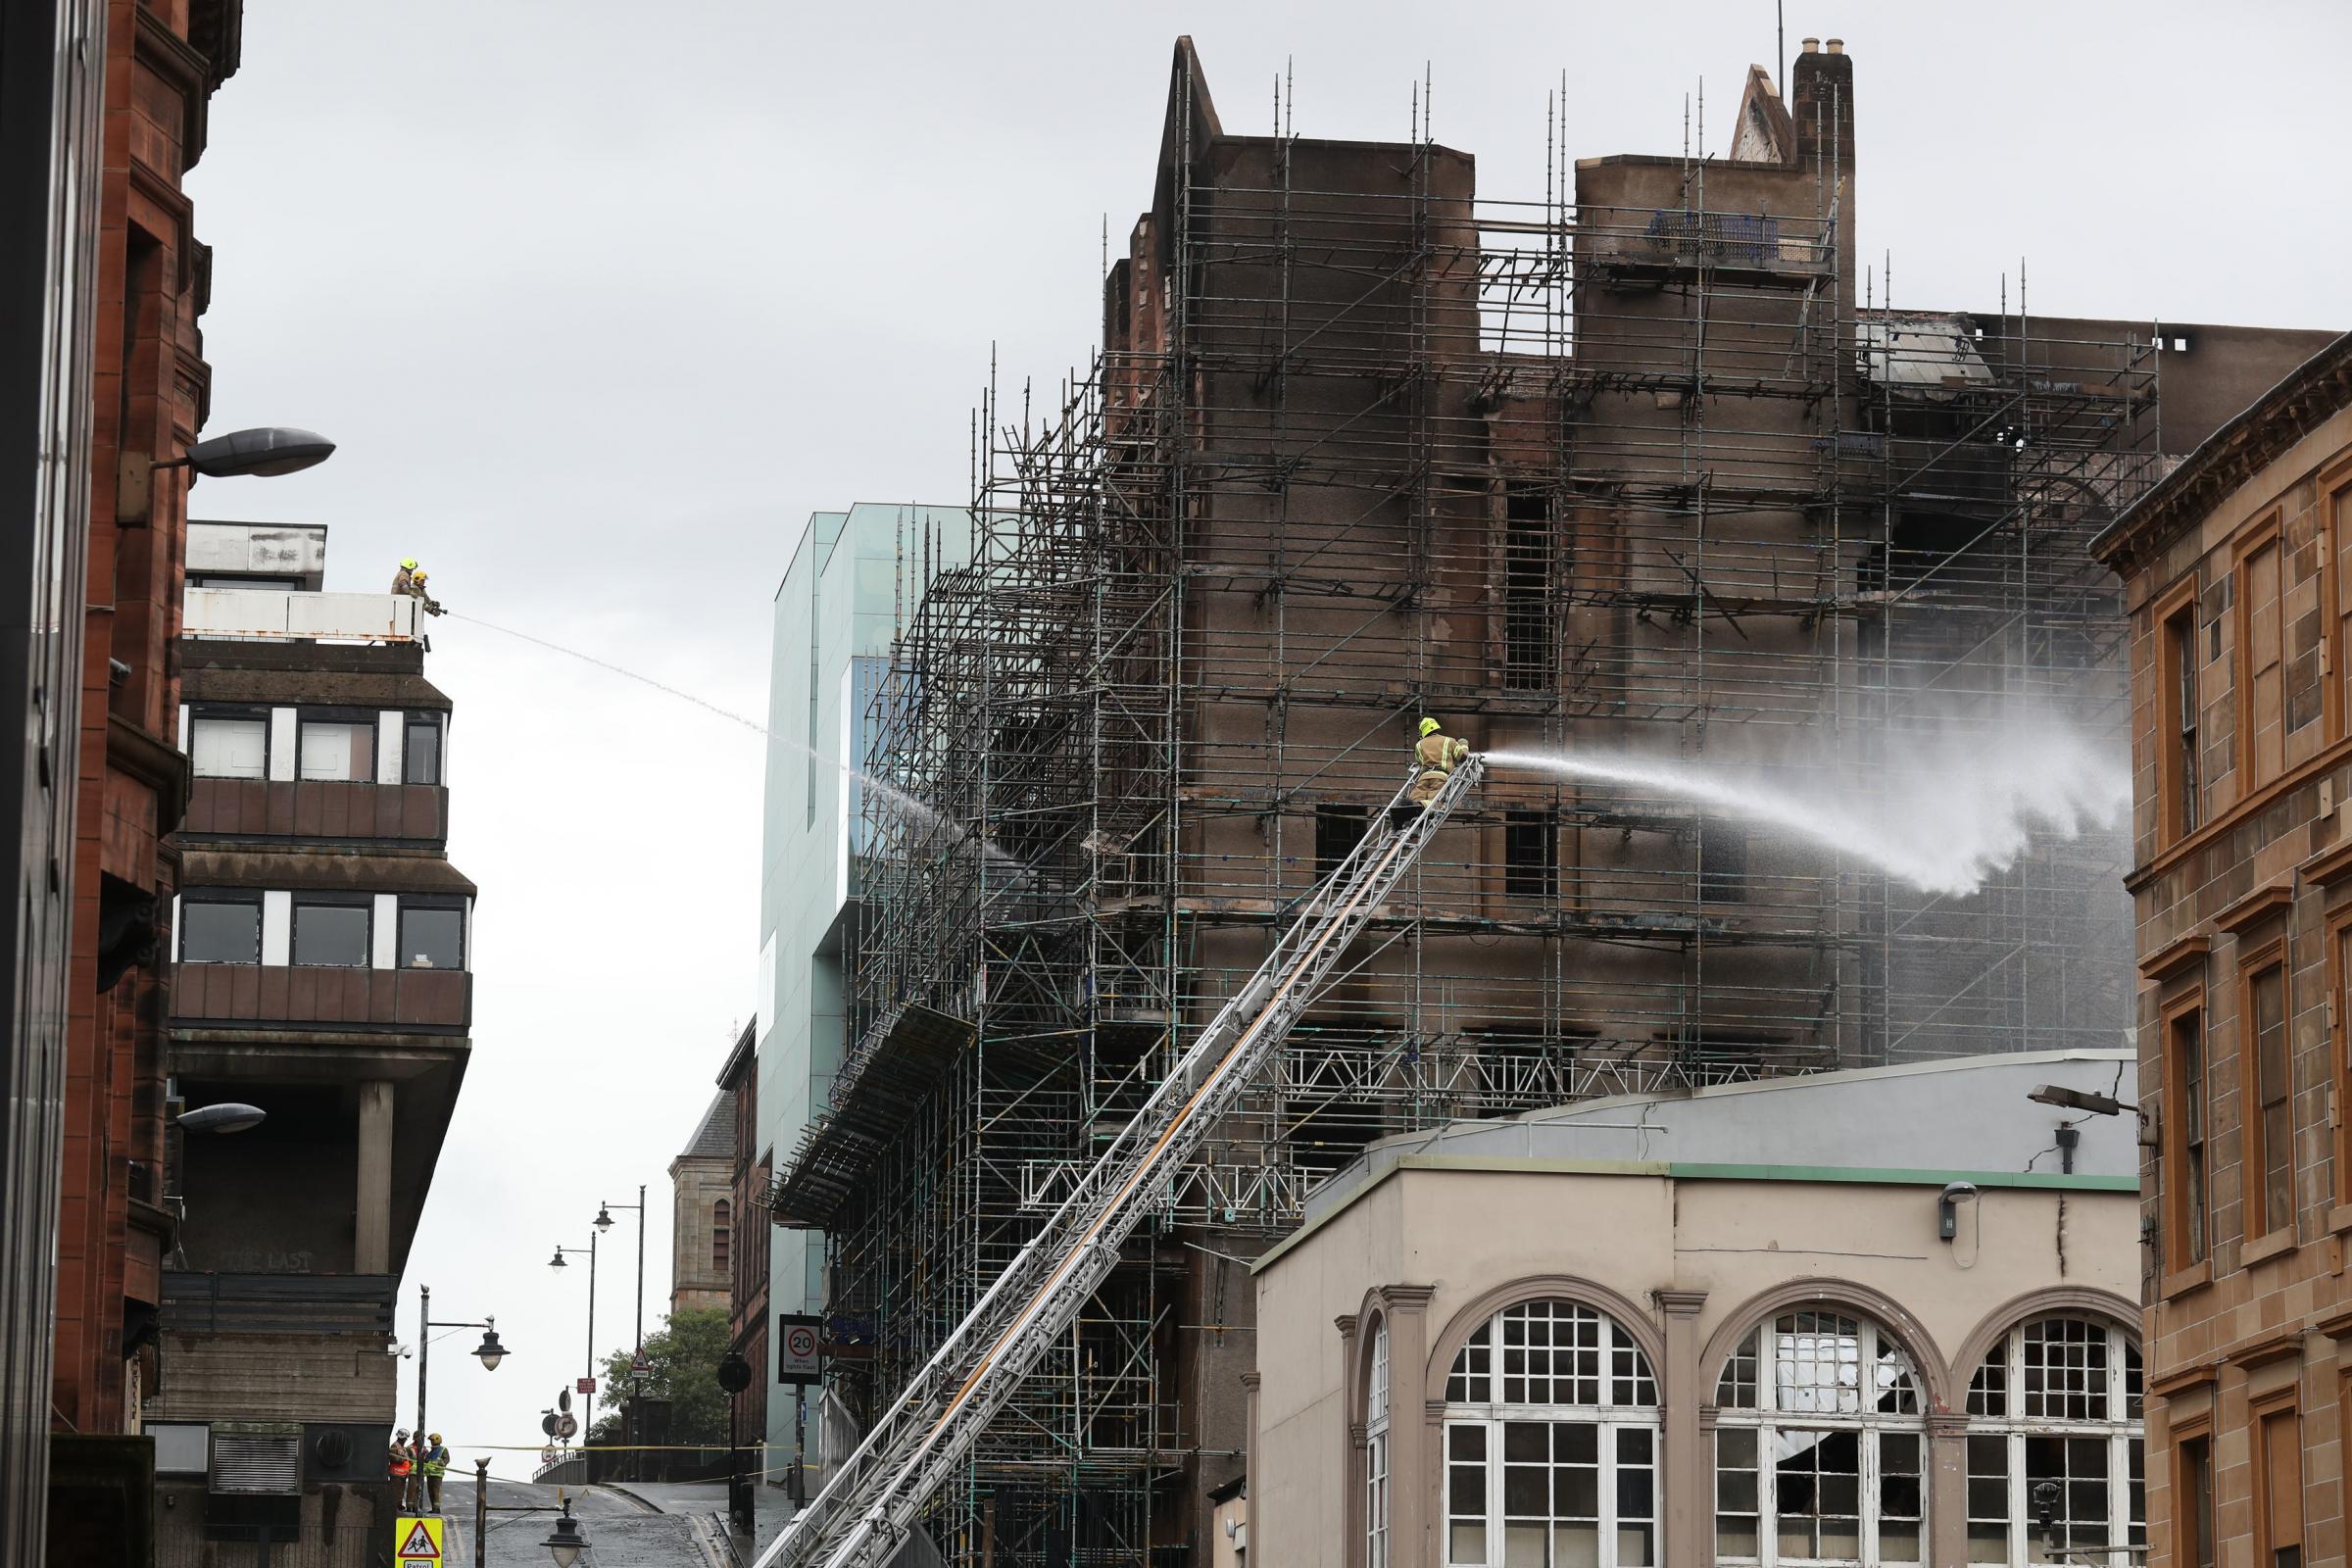 Firefighters dampening down during the 2018 fire at the Glasgow School of Art (GSA) in the historic Mackintosh Building in Glasgow.